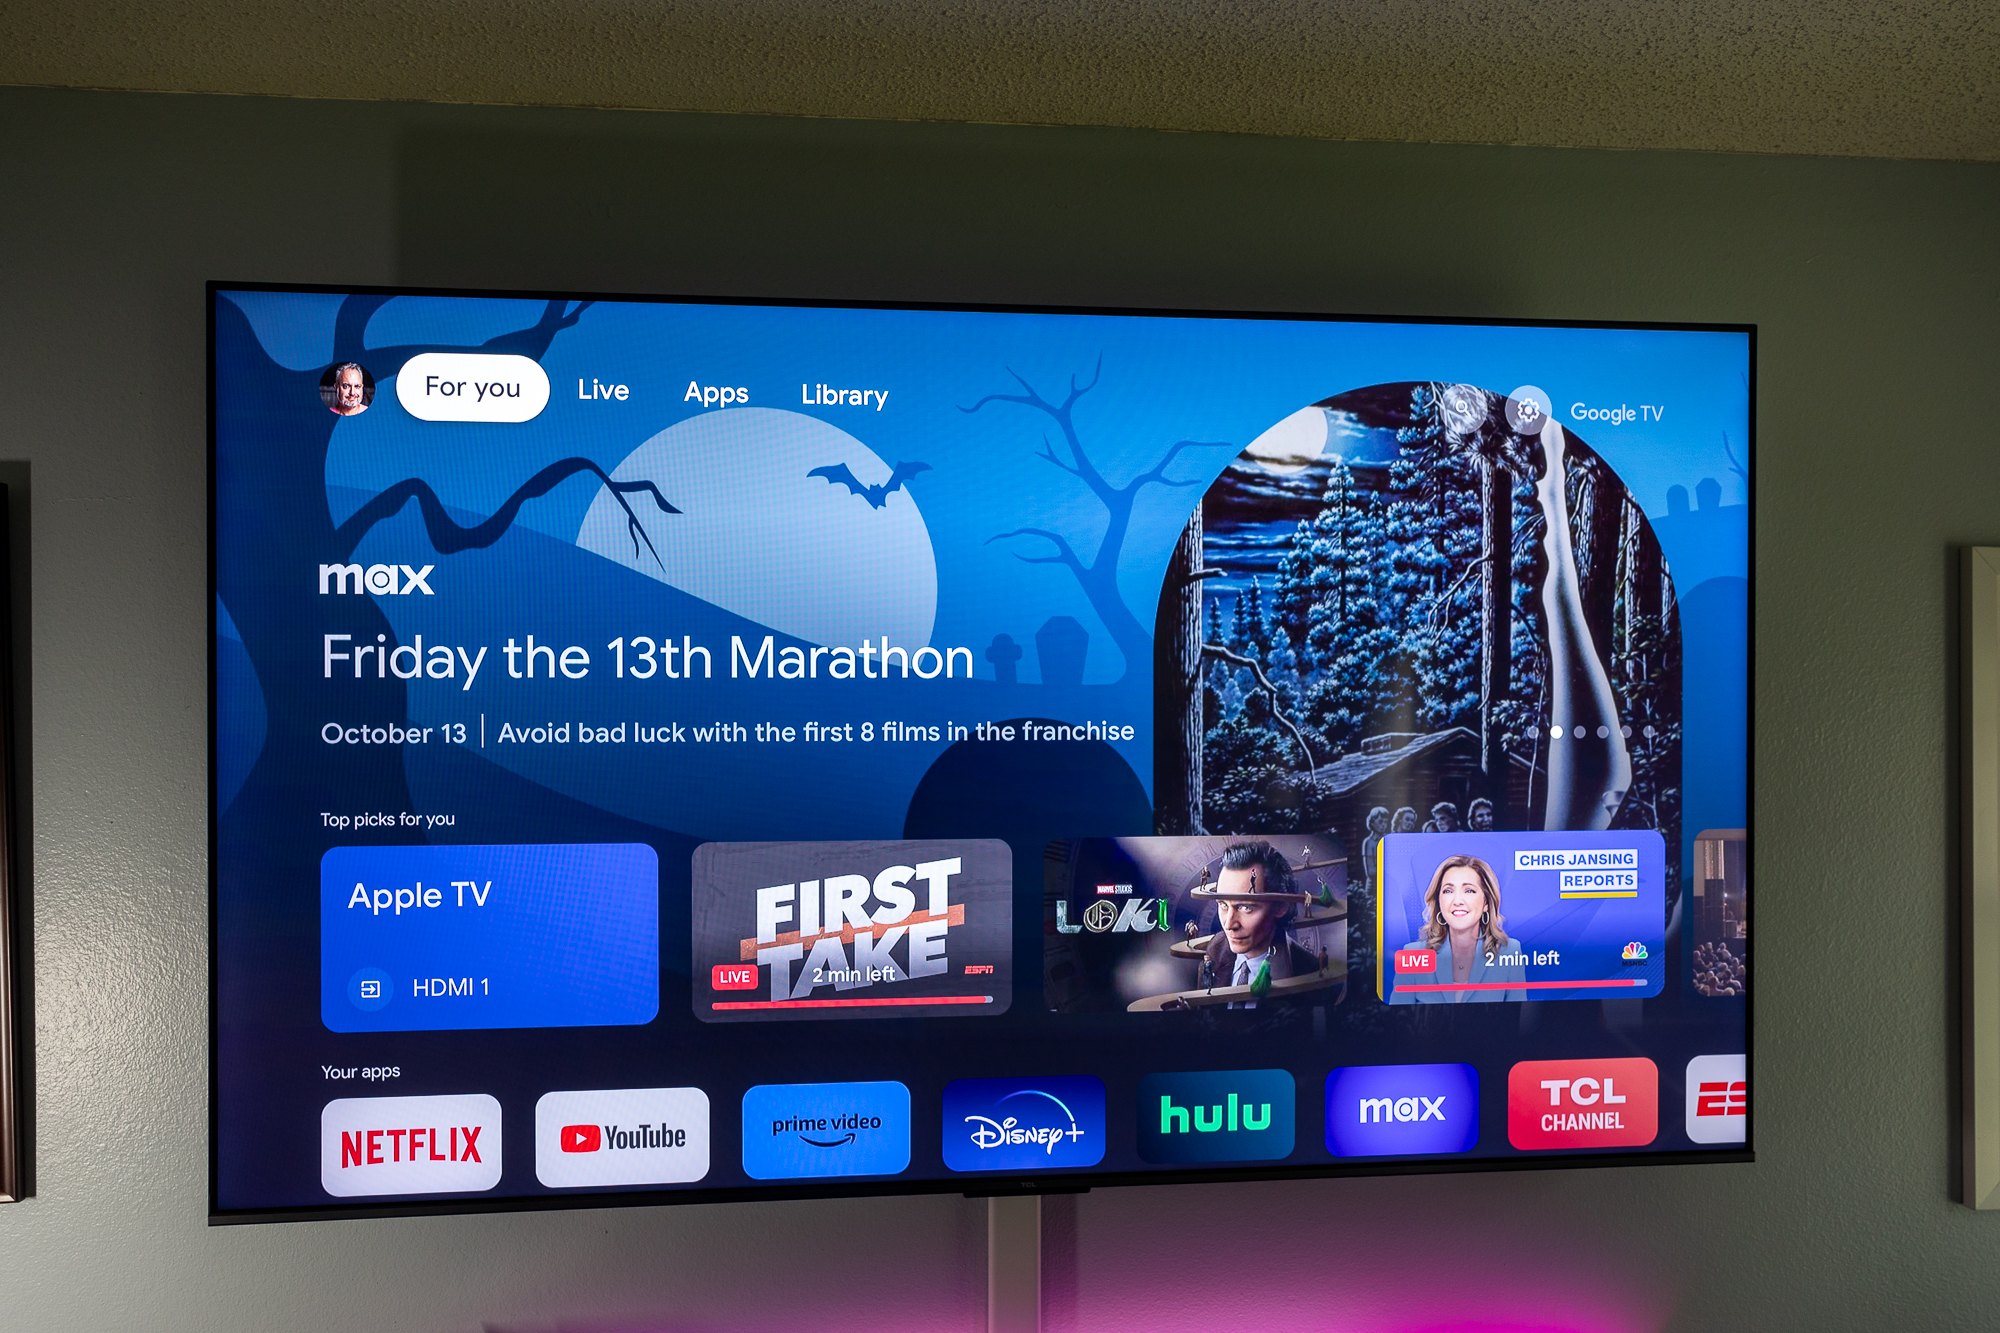 This high-definition 70 TCL smart TV is just $600